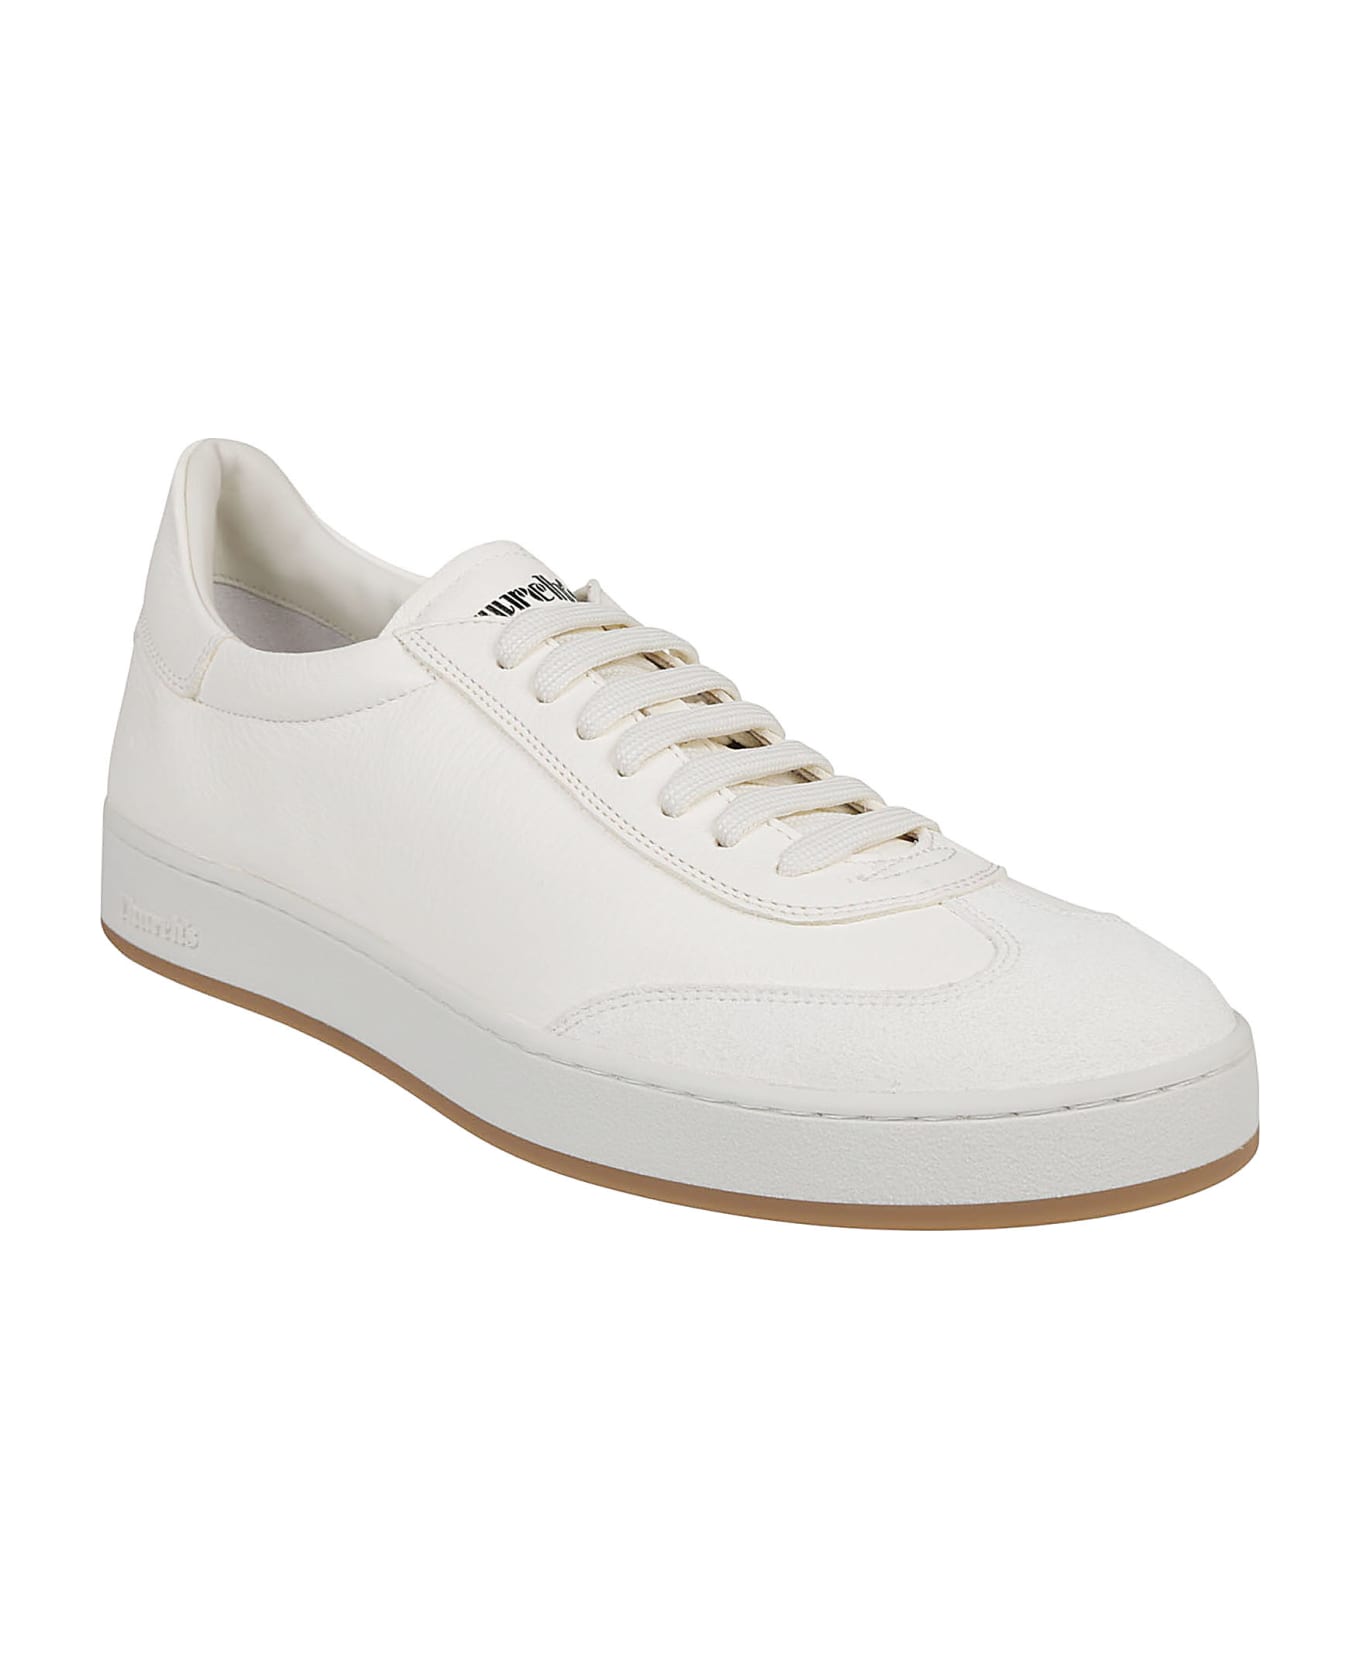 Church's Largs Low Top Sneakers - All Ivory スニーカー